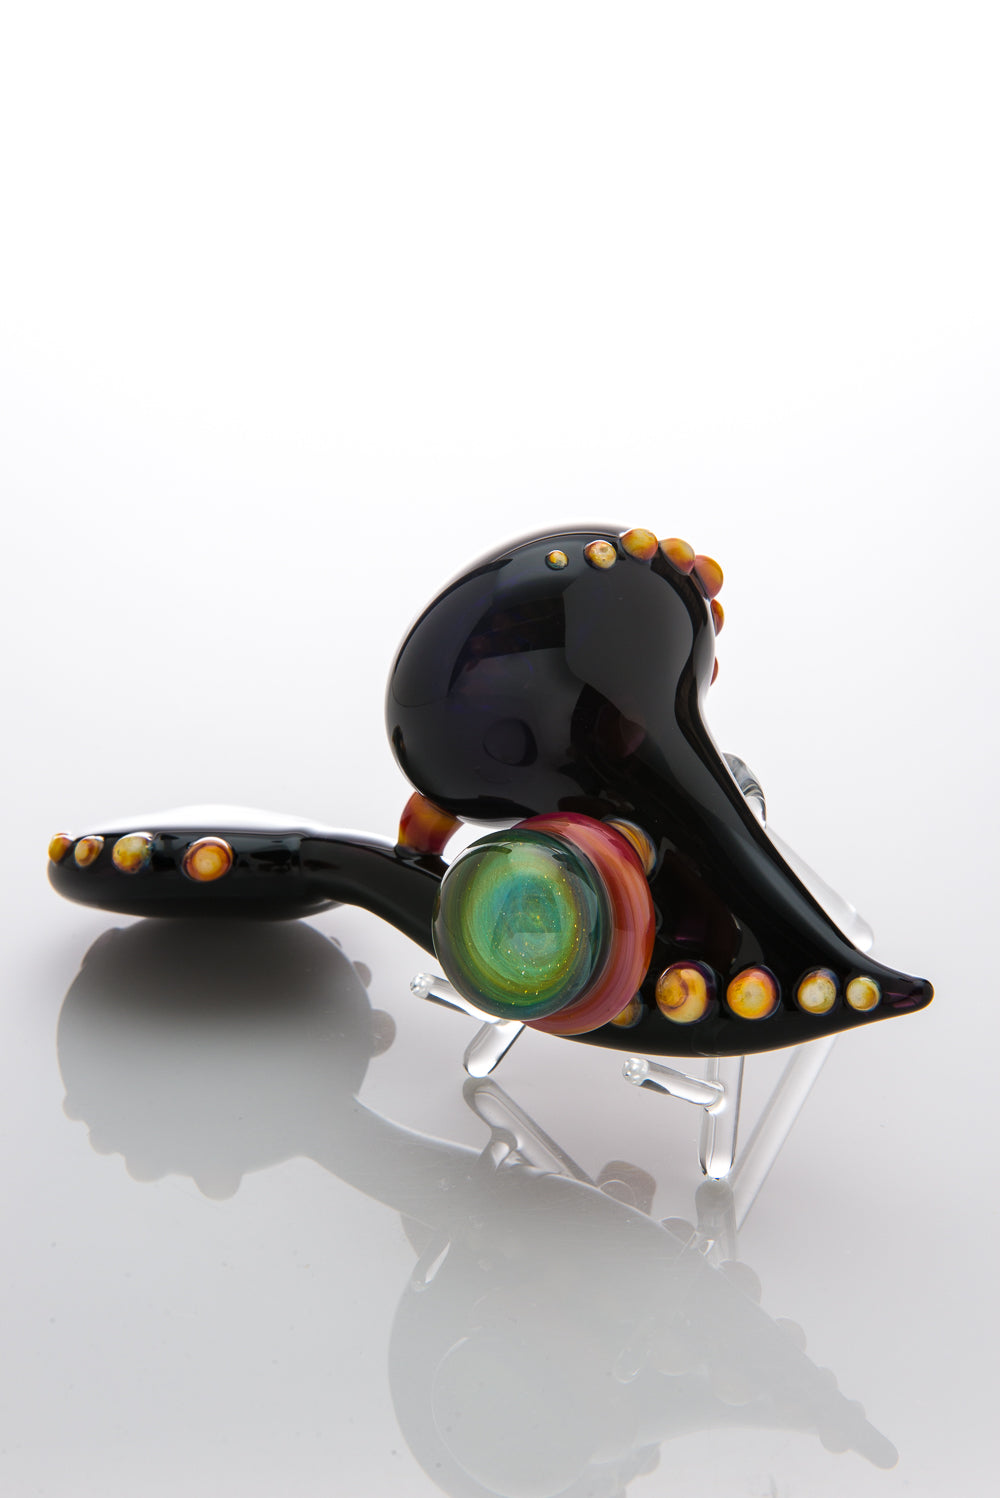 Tetrahedron Sherlock with Fillacello and Marble by WJC